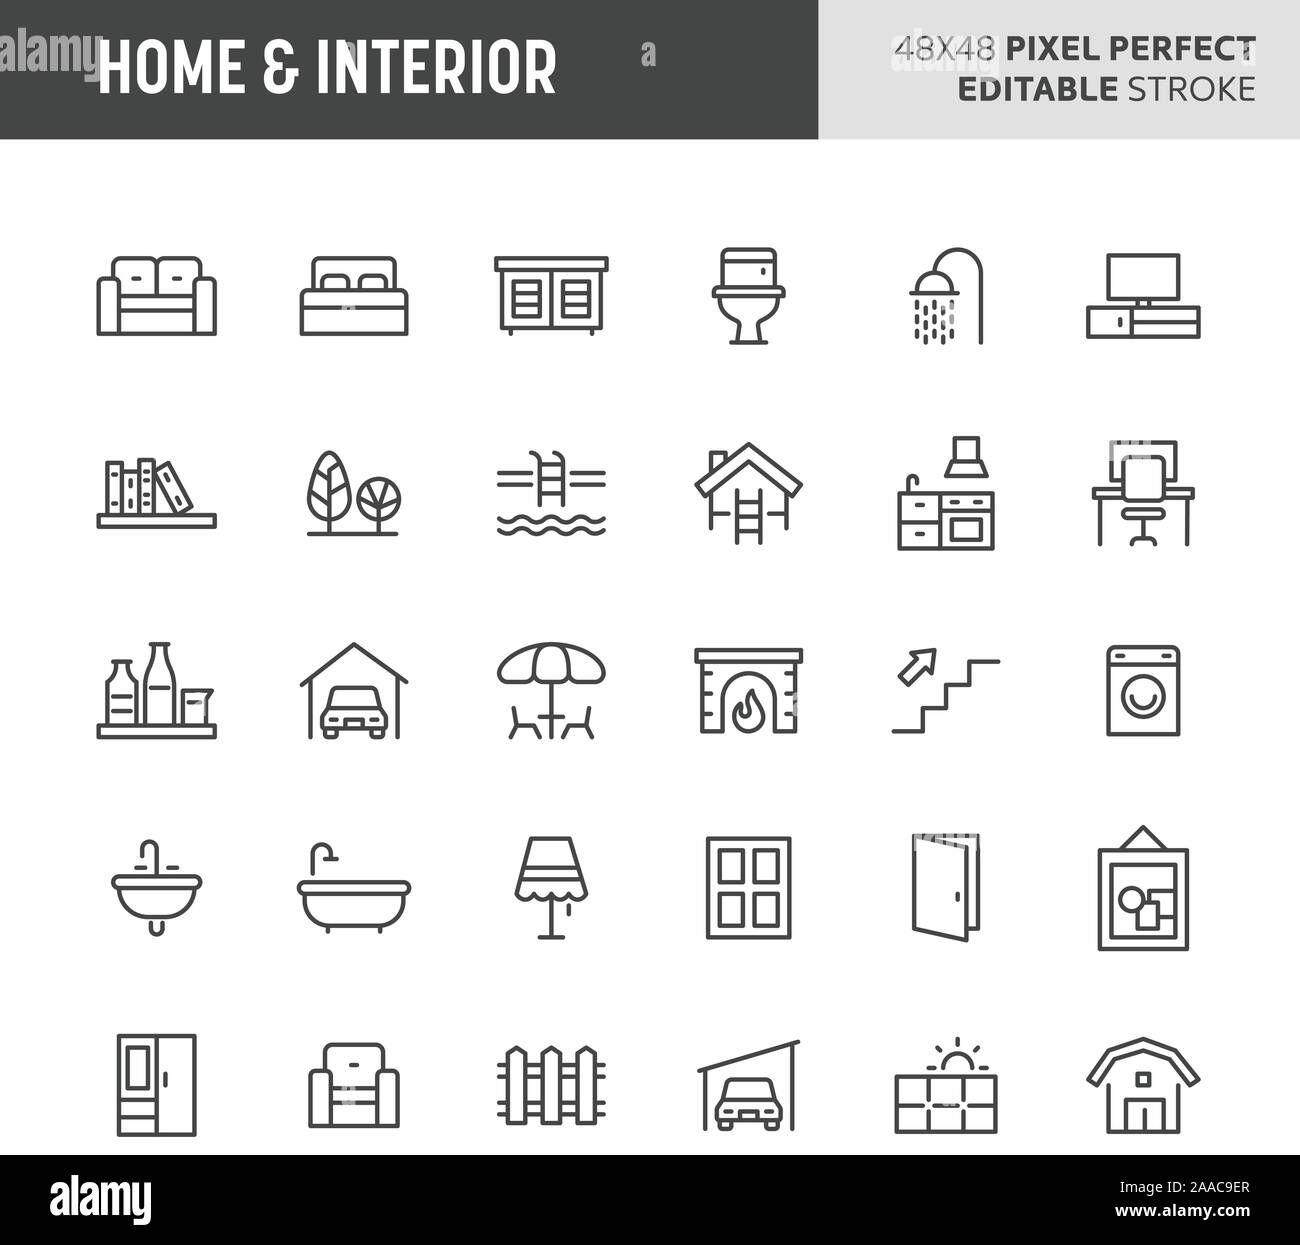 30 thin line icons associated with home & interior. Symbols such as home furniture, types of room and home appliances are included in this set. 48x48 Stock Vector